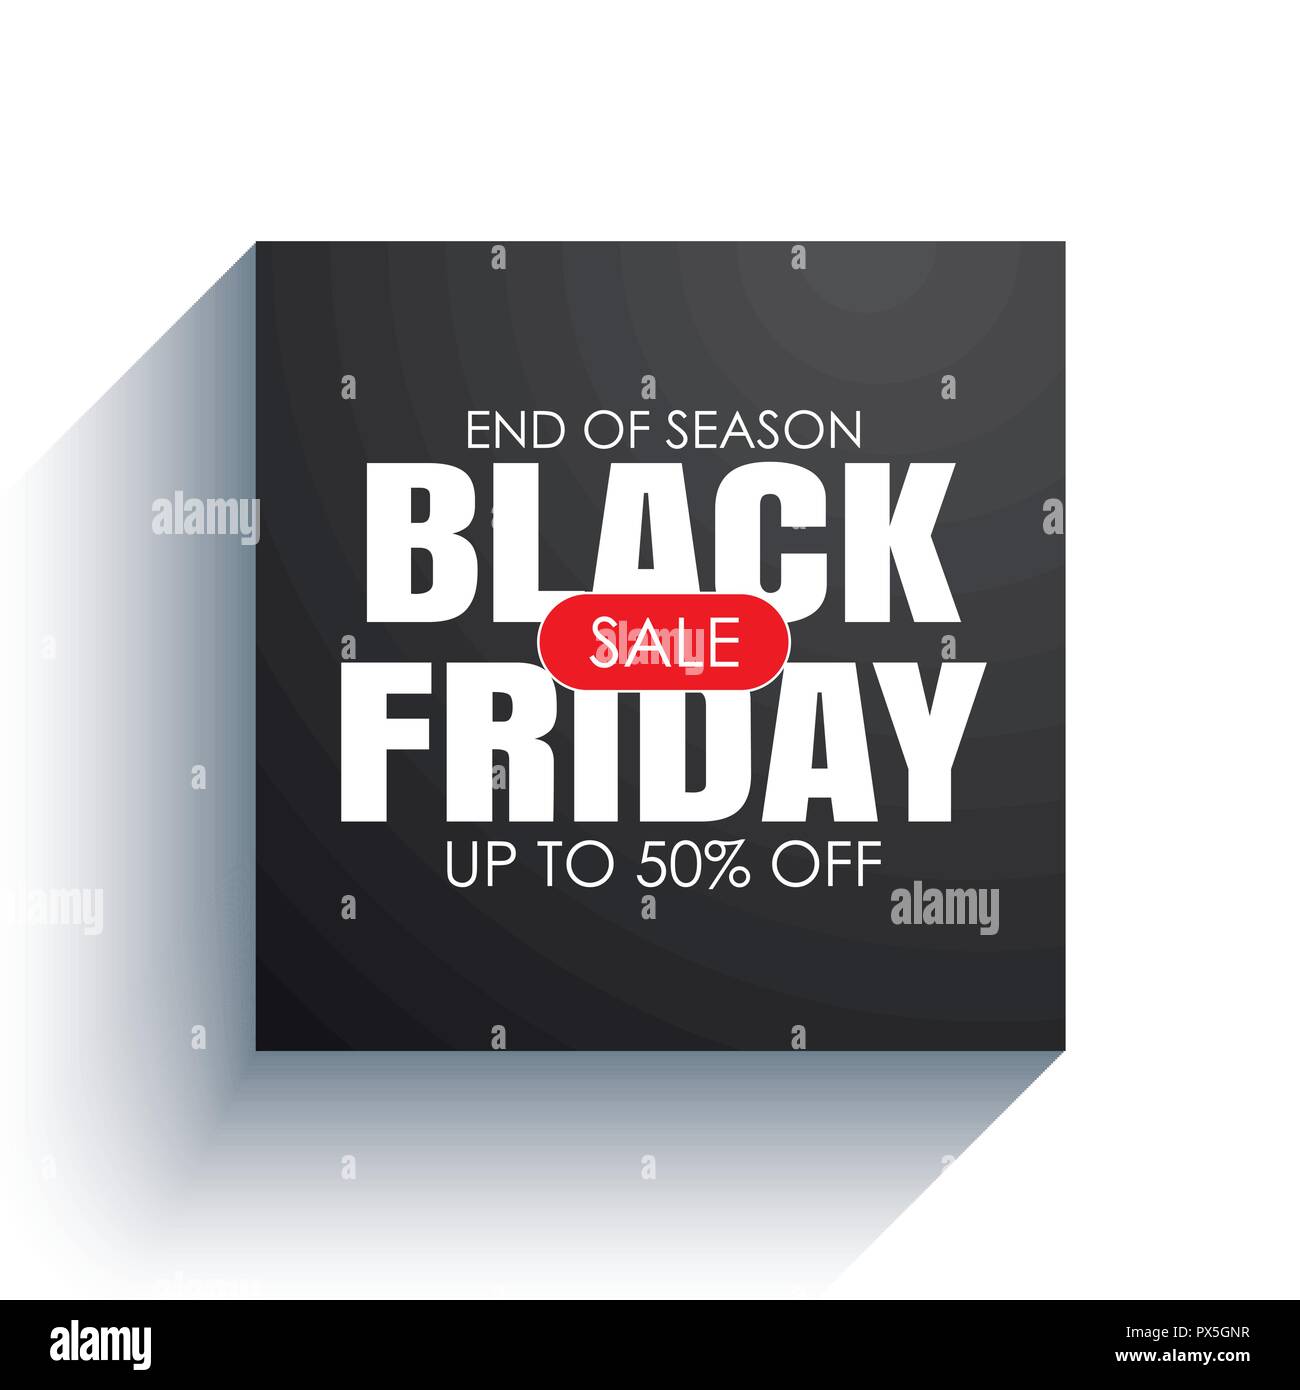 Black friday sale banner with white text on black square background. Use for discount, shopping, promotion, advertising. Stock Vector